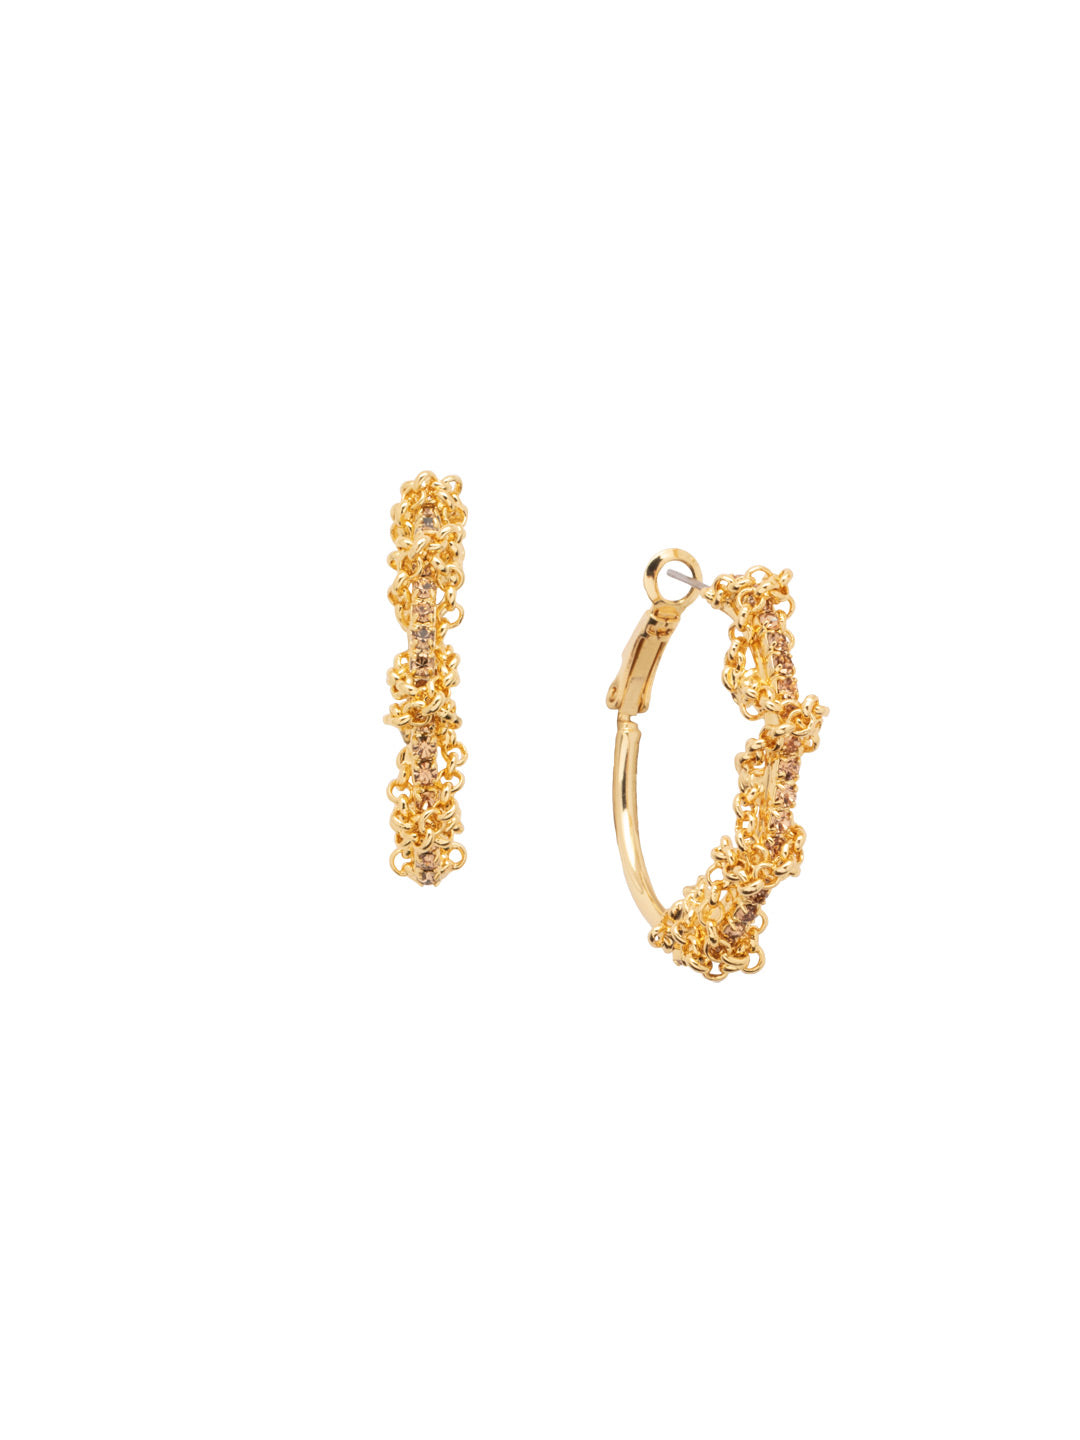 Brandi Petite Hoop Earring - EFC60BGRSU - <p>The Brandi Petite Hoop Earrings feature a classic crystal hoop elevated with a braided chain design. From Sorrelli's Raw Sugar collection in our Bright Gold-tone finish.</p>